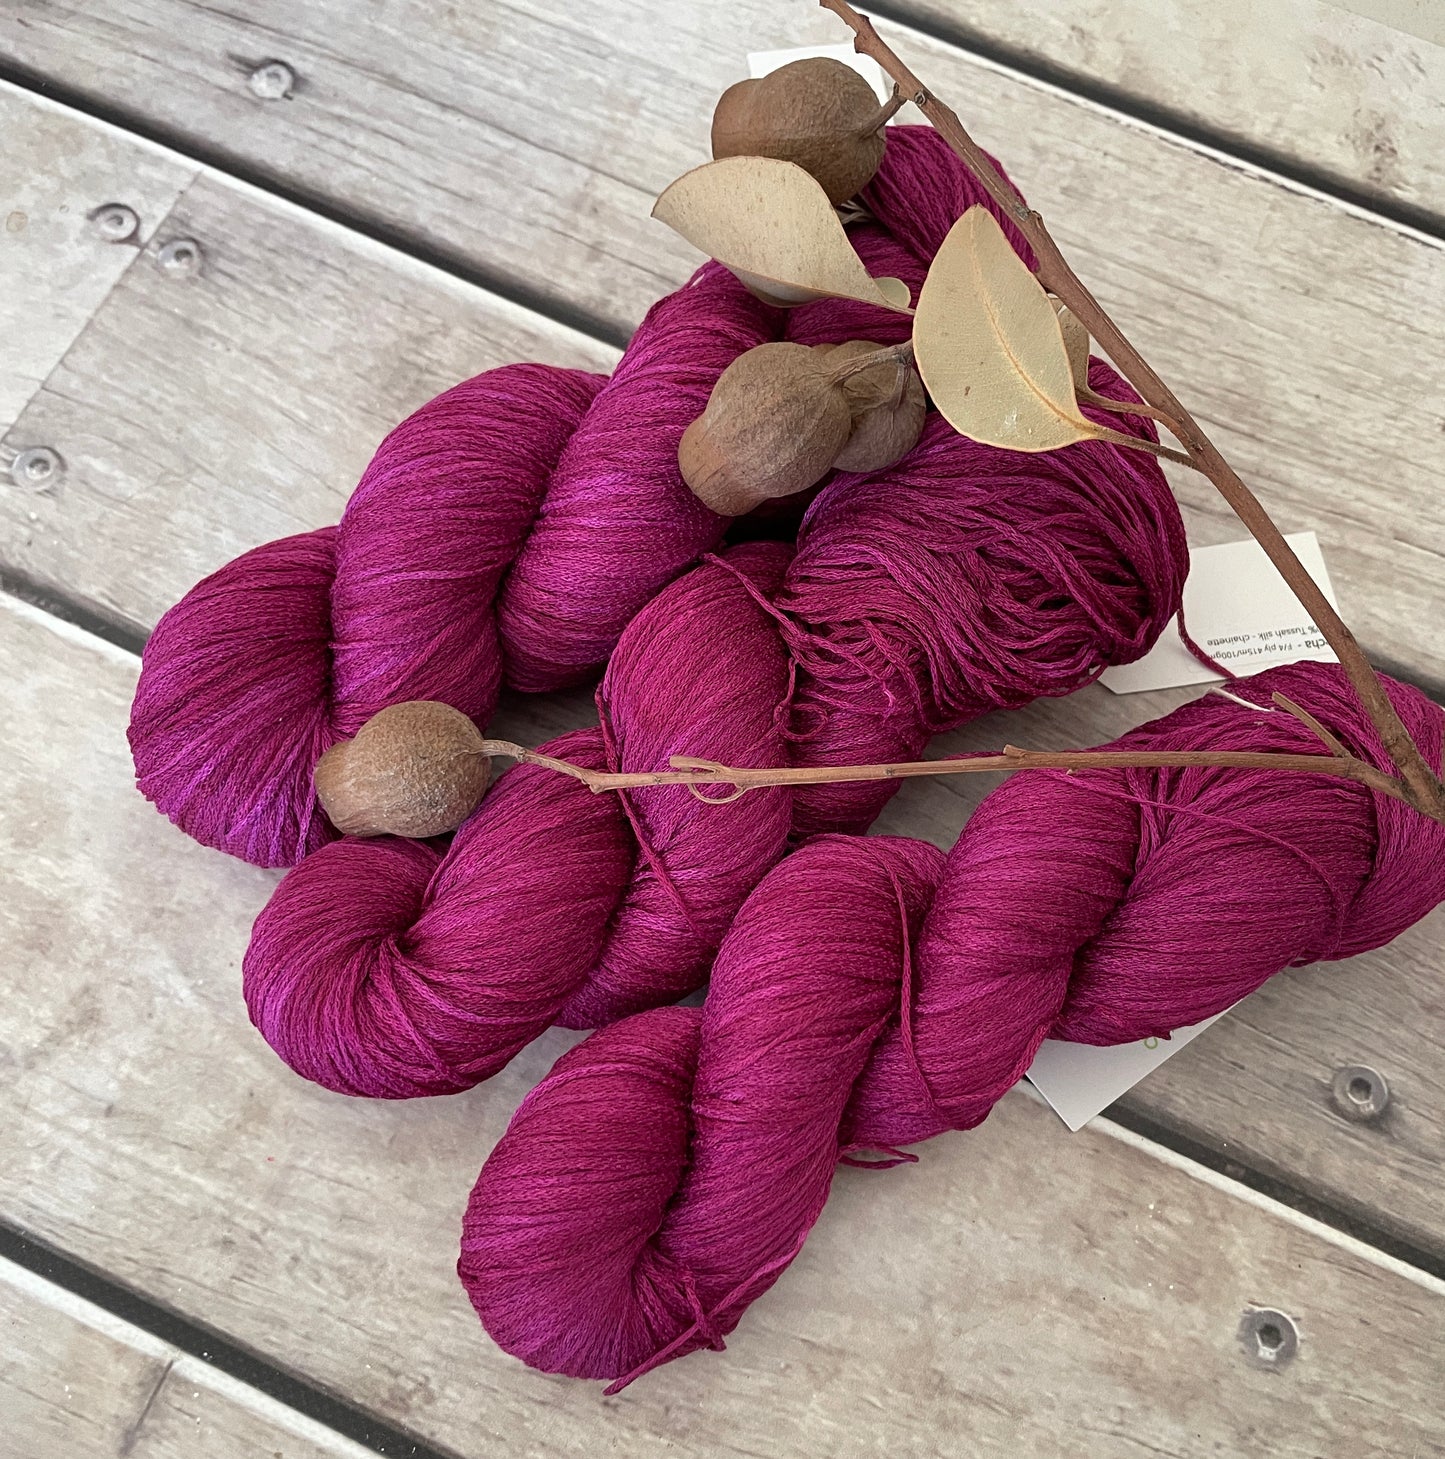 Wild Orchid on Yecha - Tussah silk chainette - 4 ply